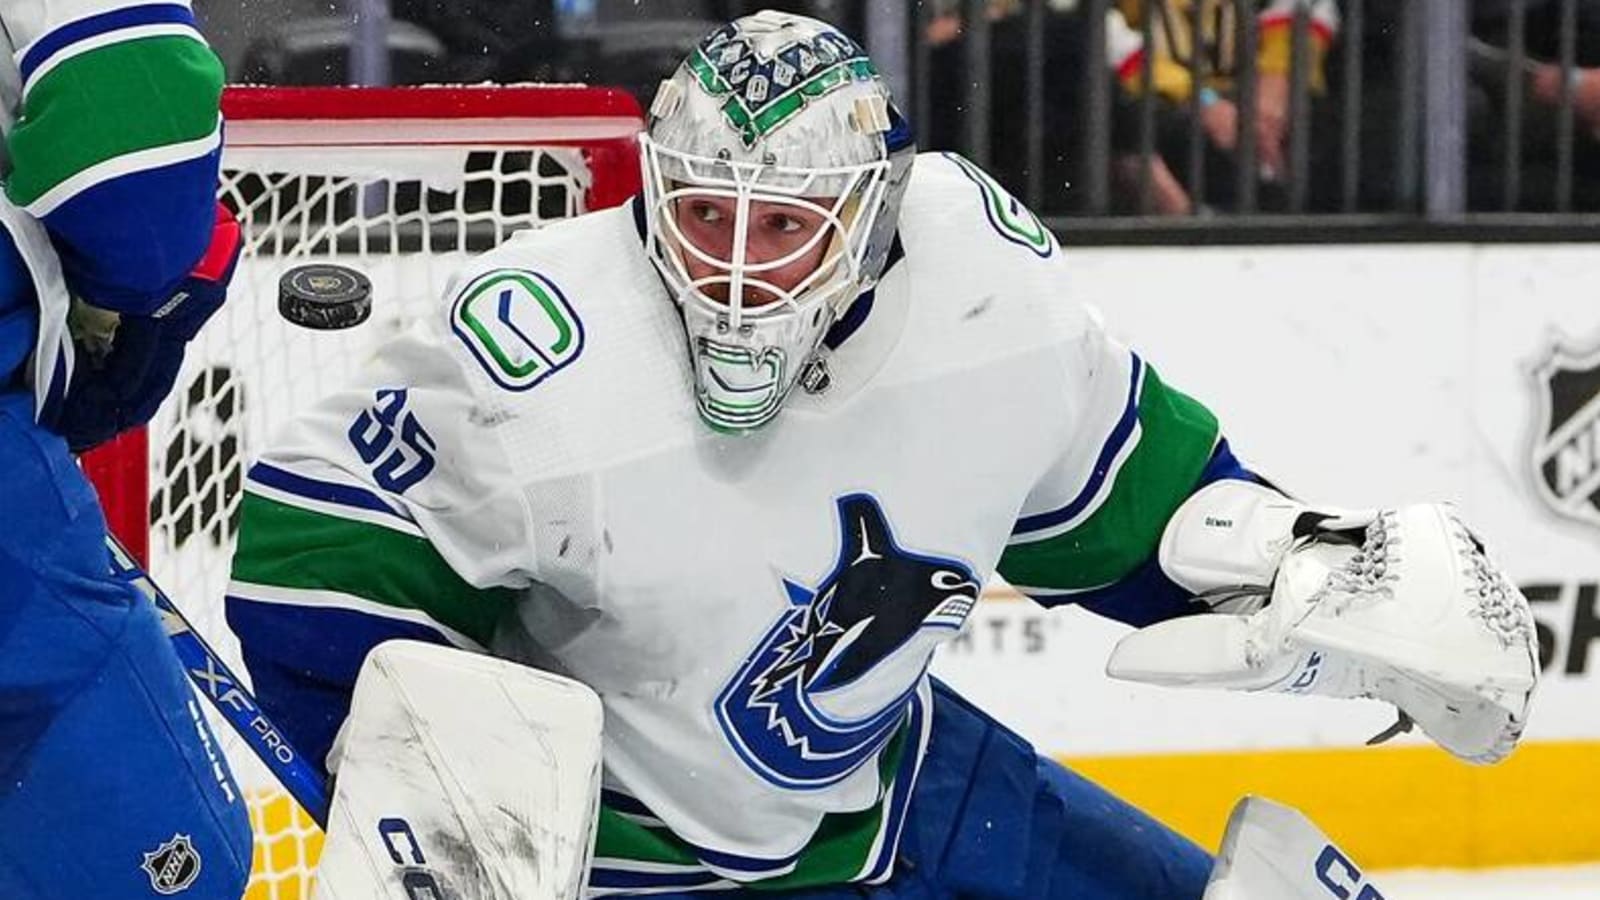 Scenes from playoff practice: Demko skates again as Canucks prepare for Wednesday’s opener against Oilers